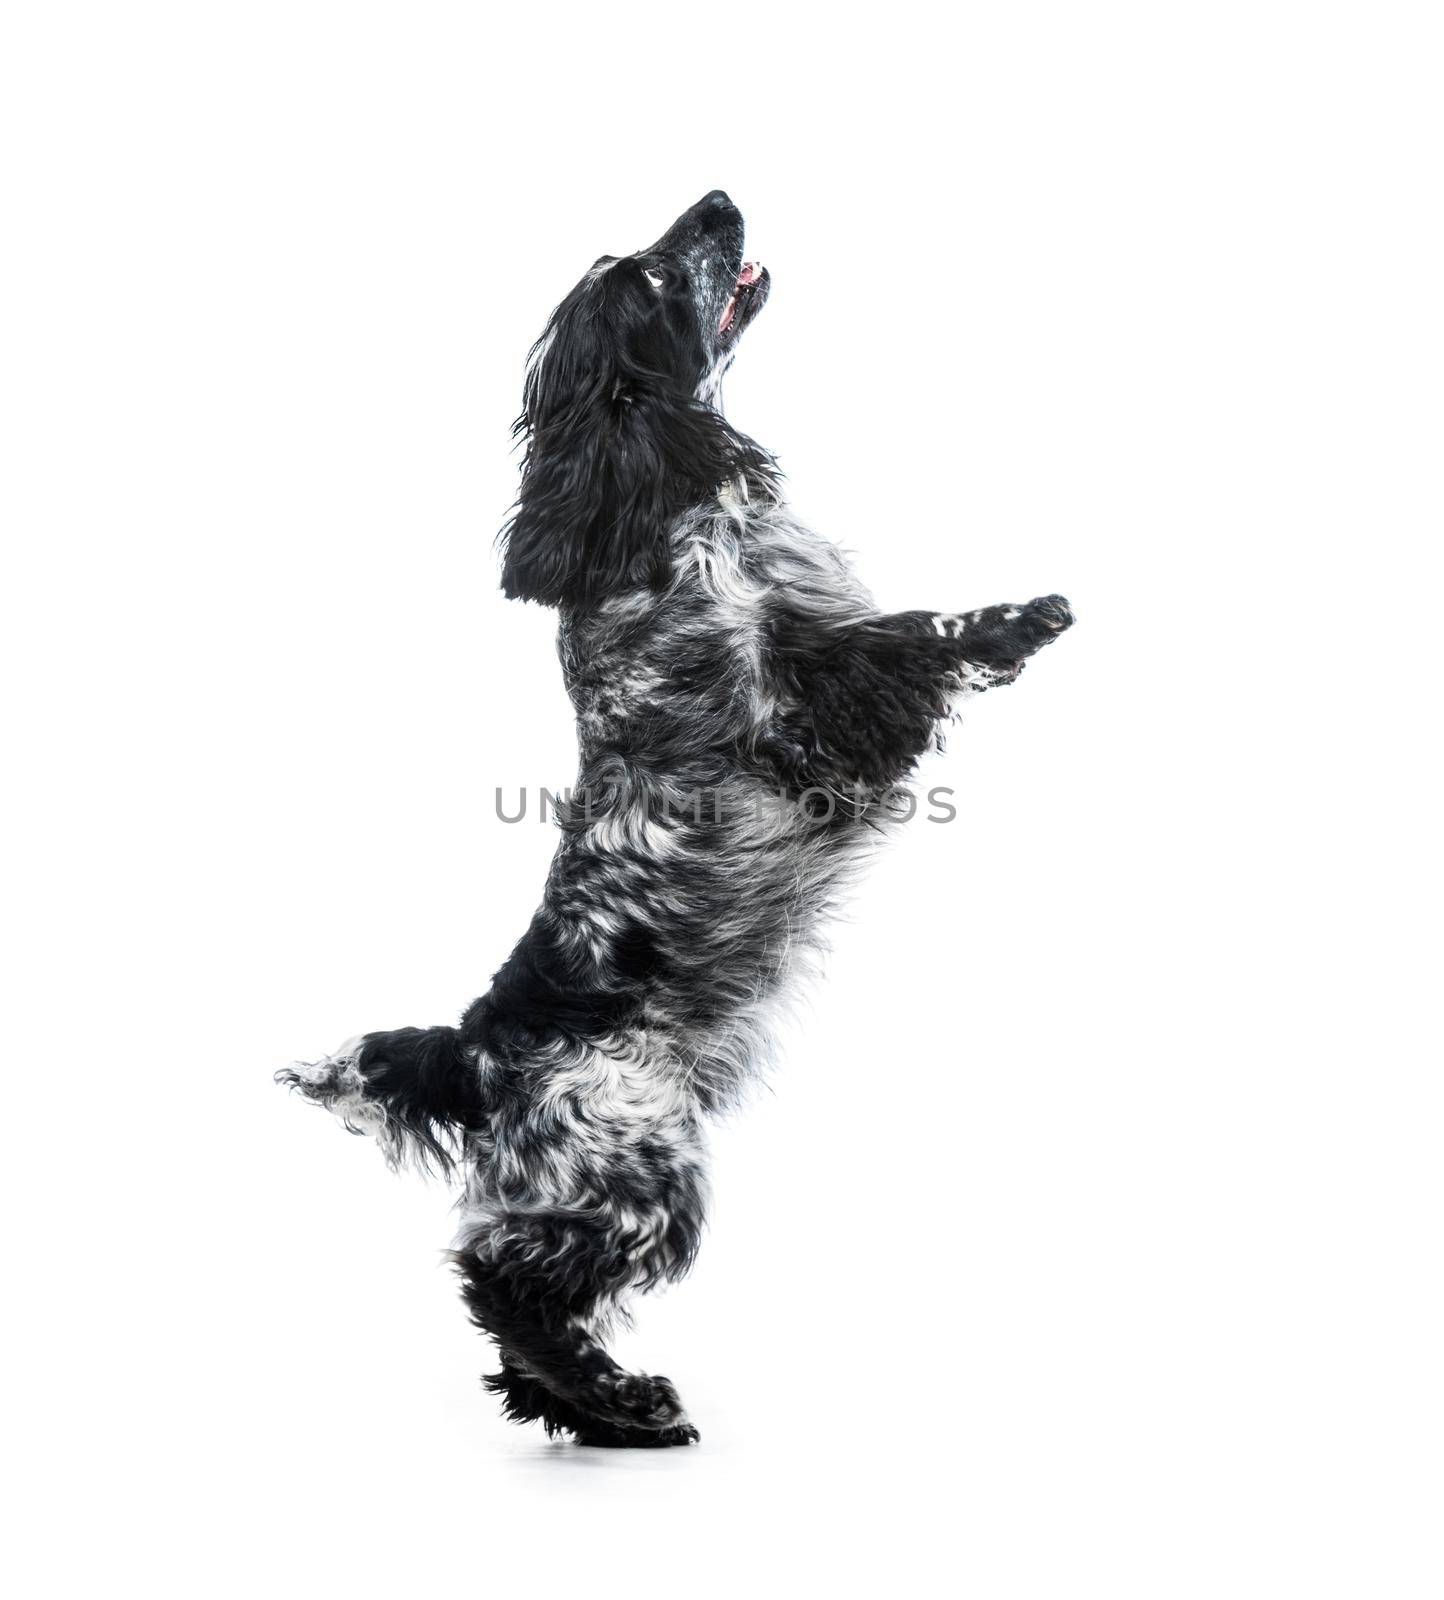 Spaniel puppy dog jump. Isolated on a white background